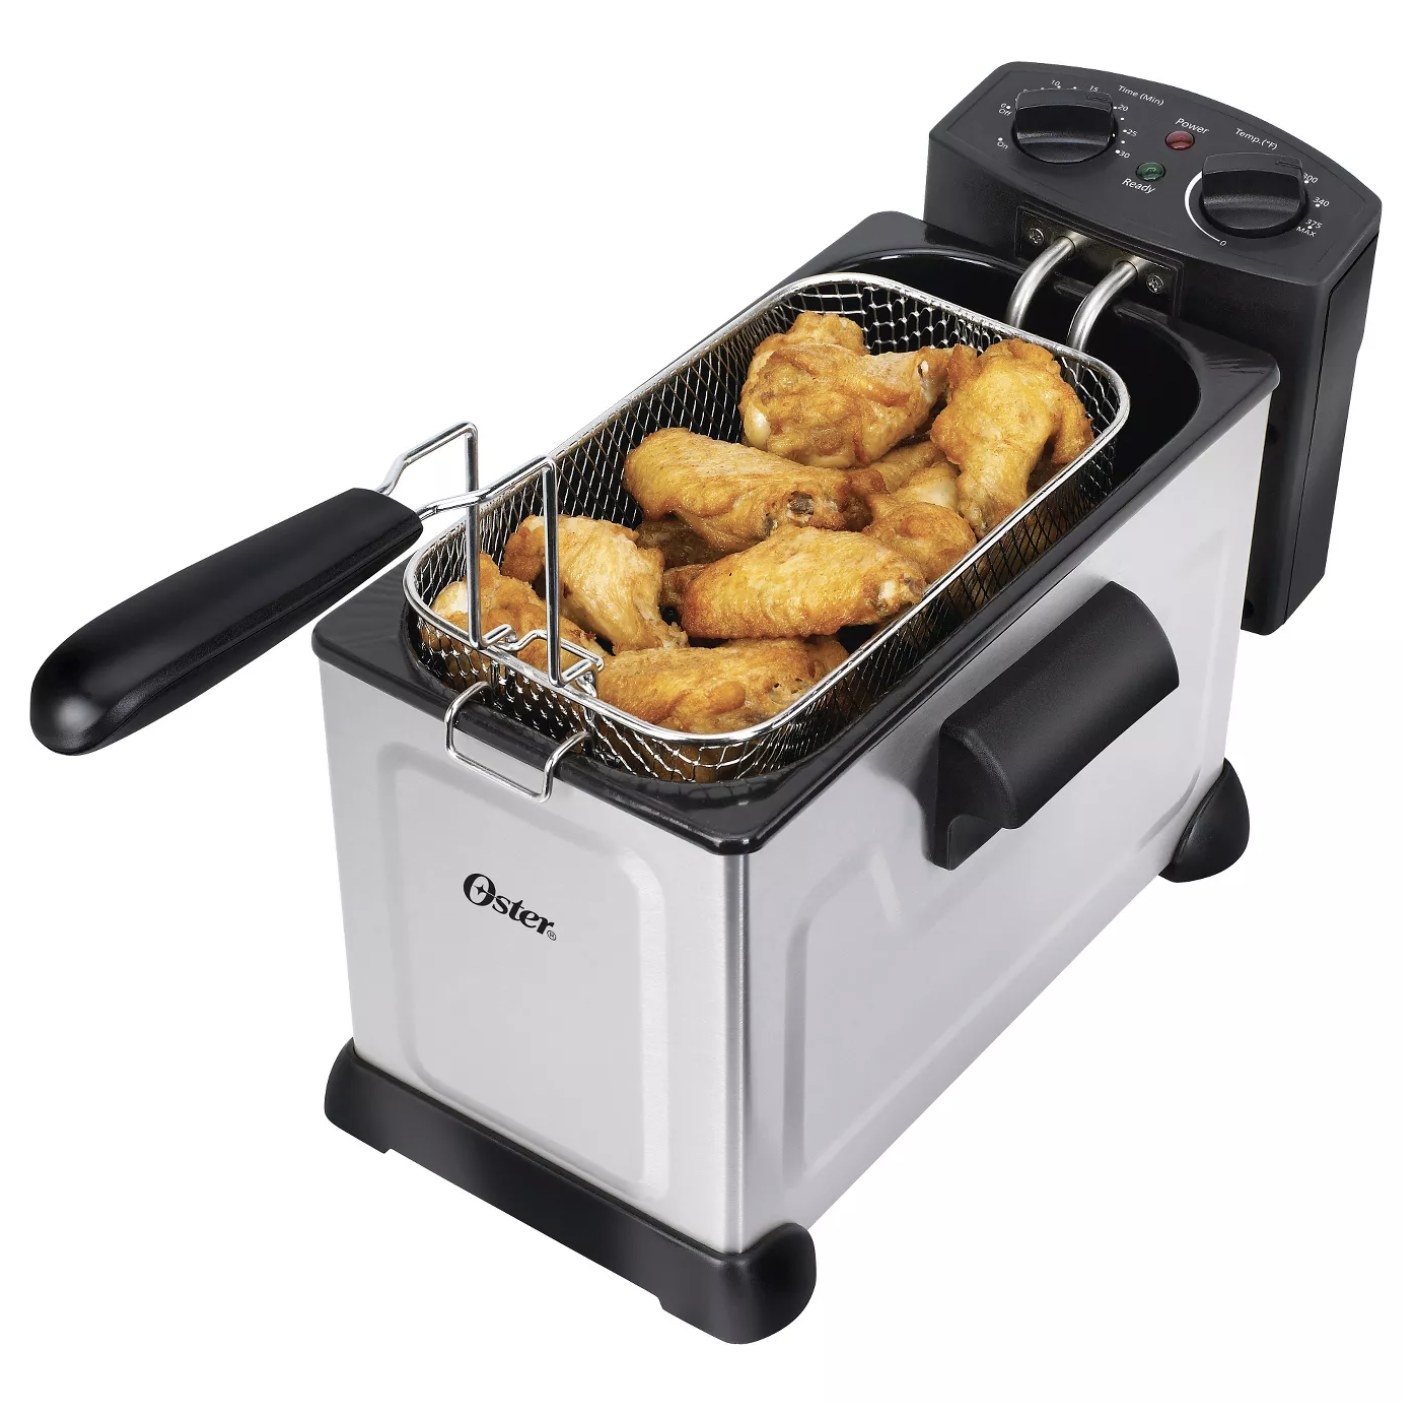 A deep fryer with chicken inside the basket